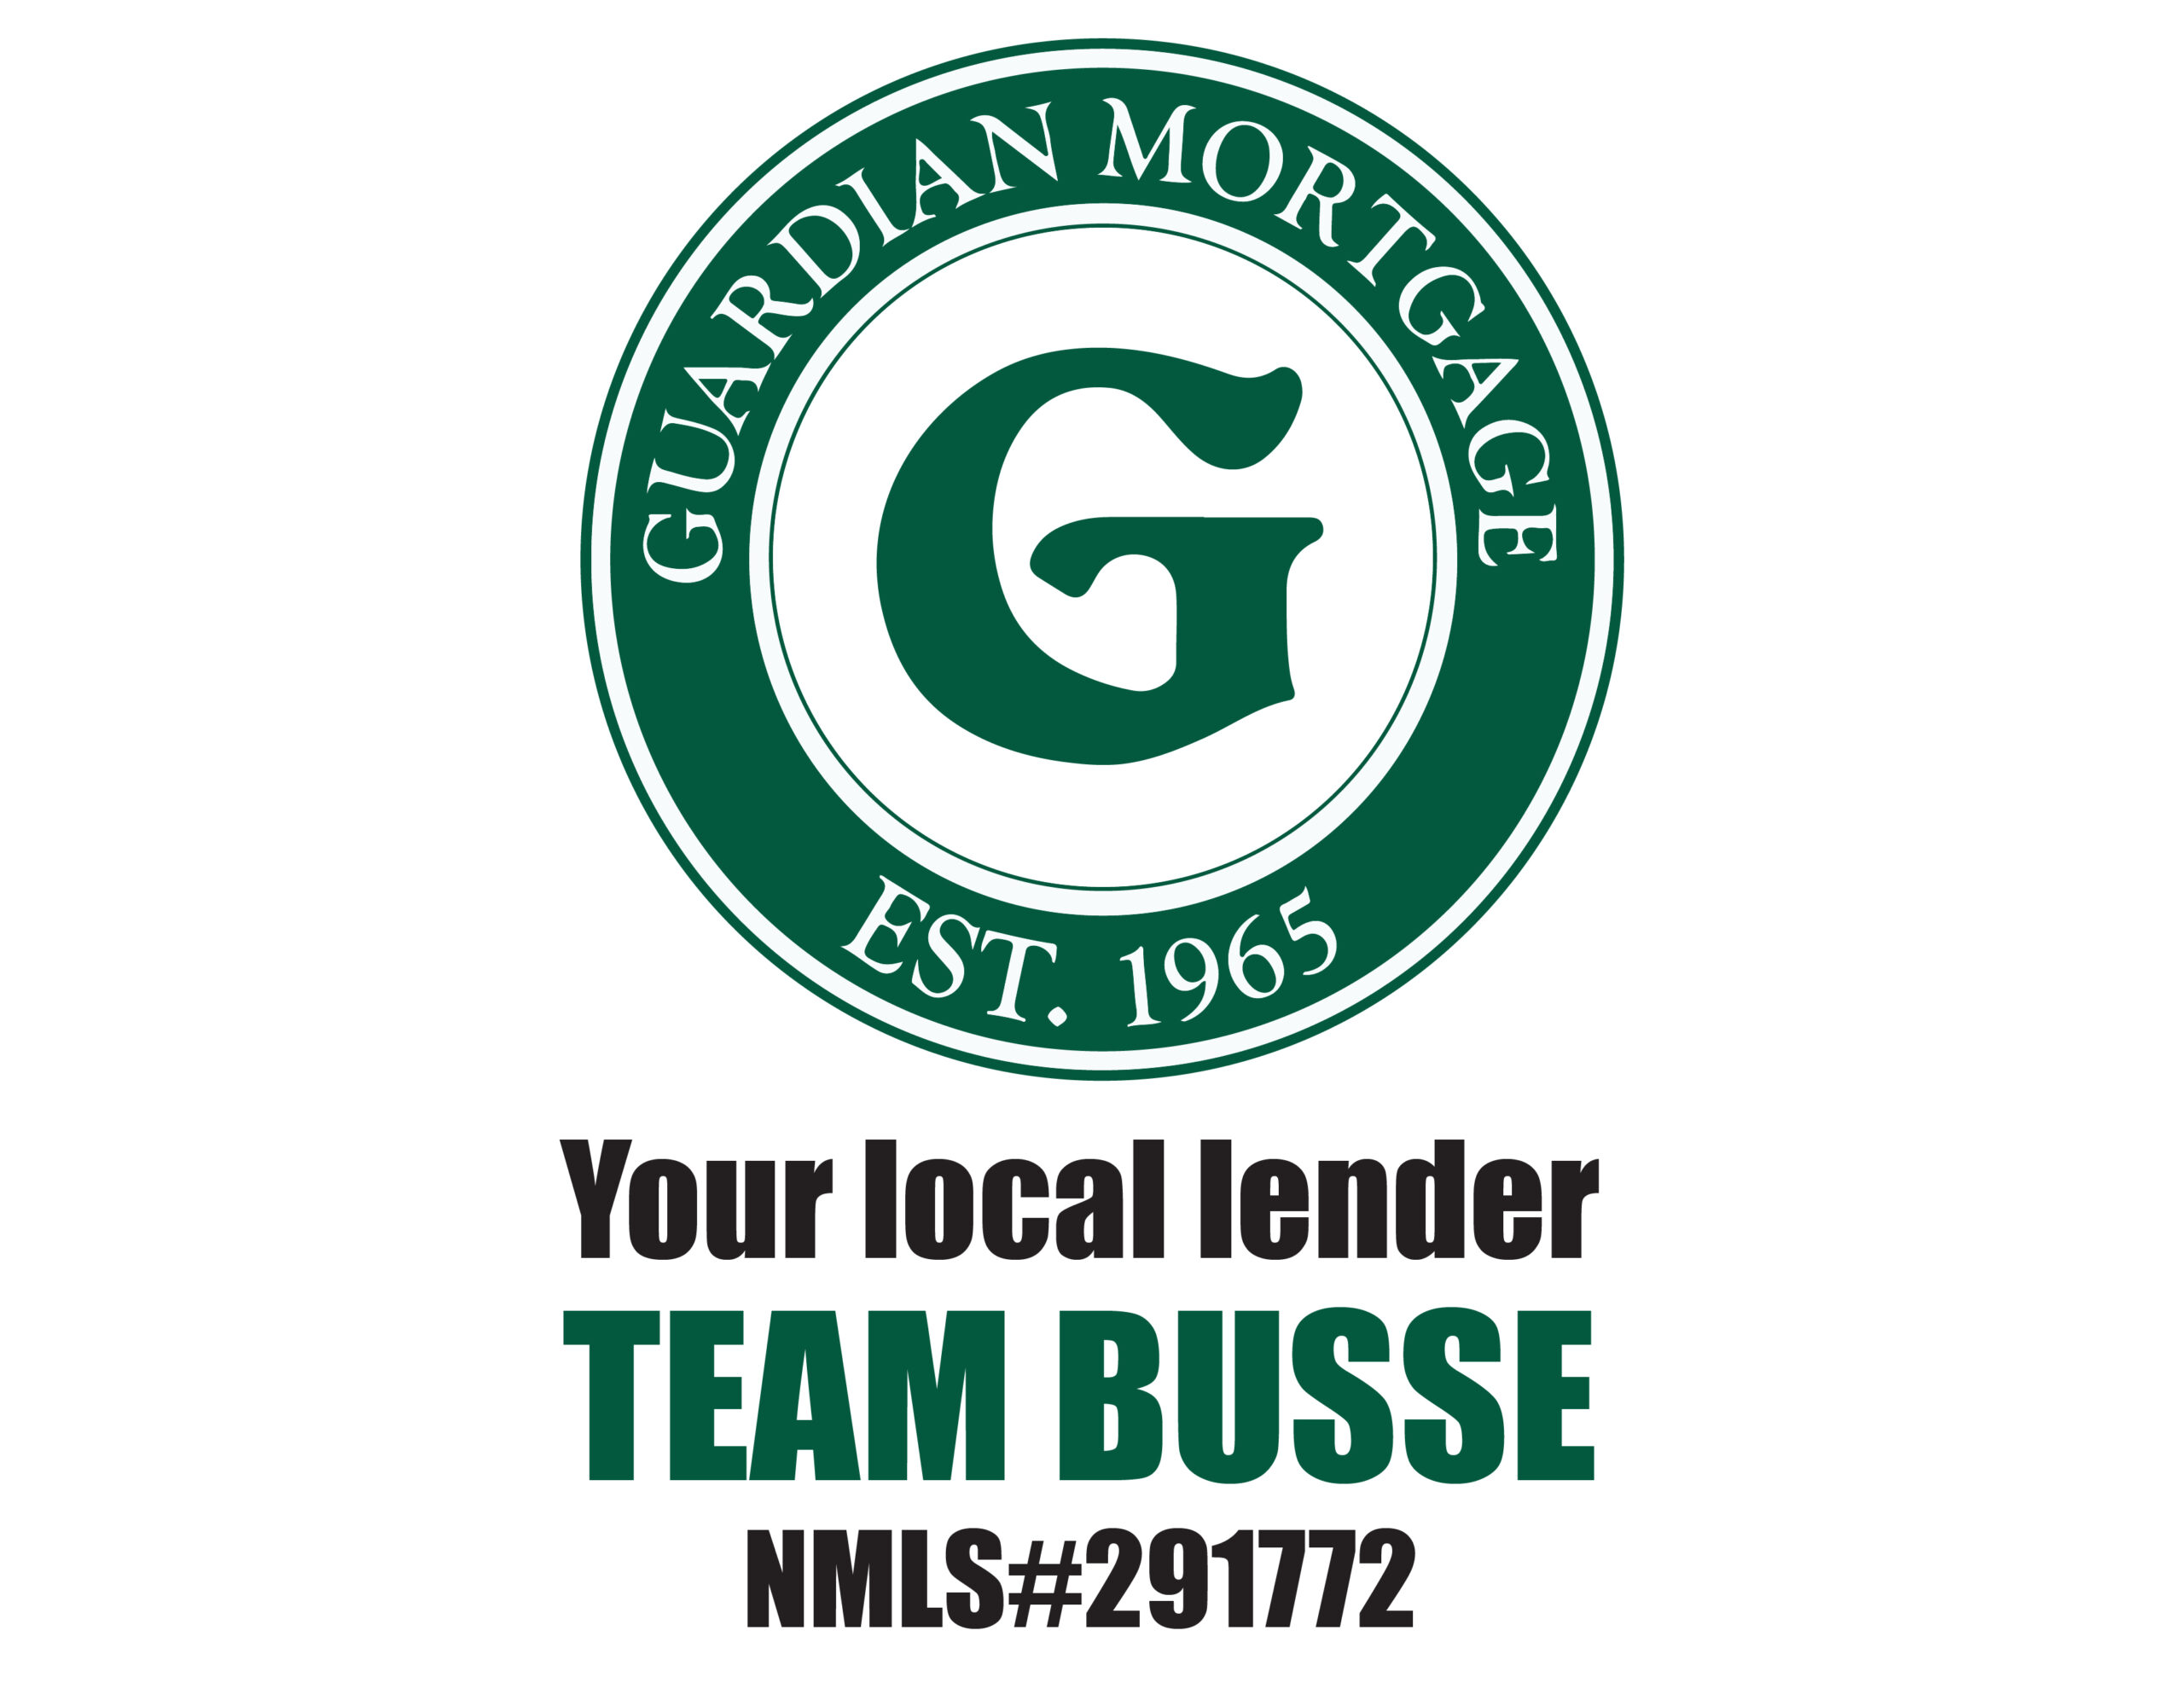 Guardian Mortgage Busse Team